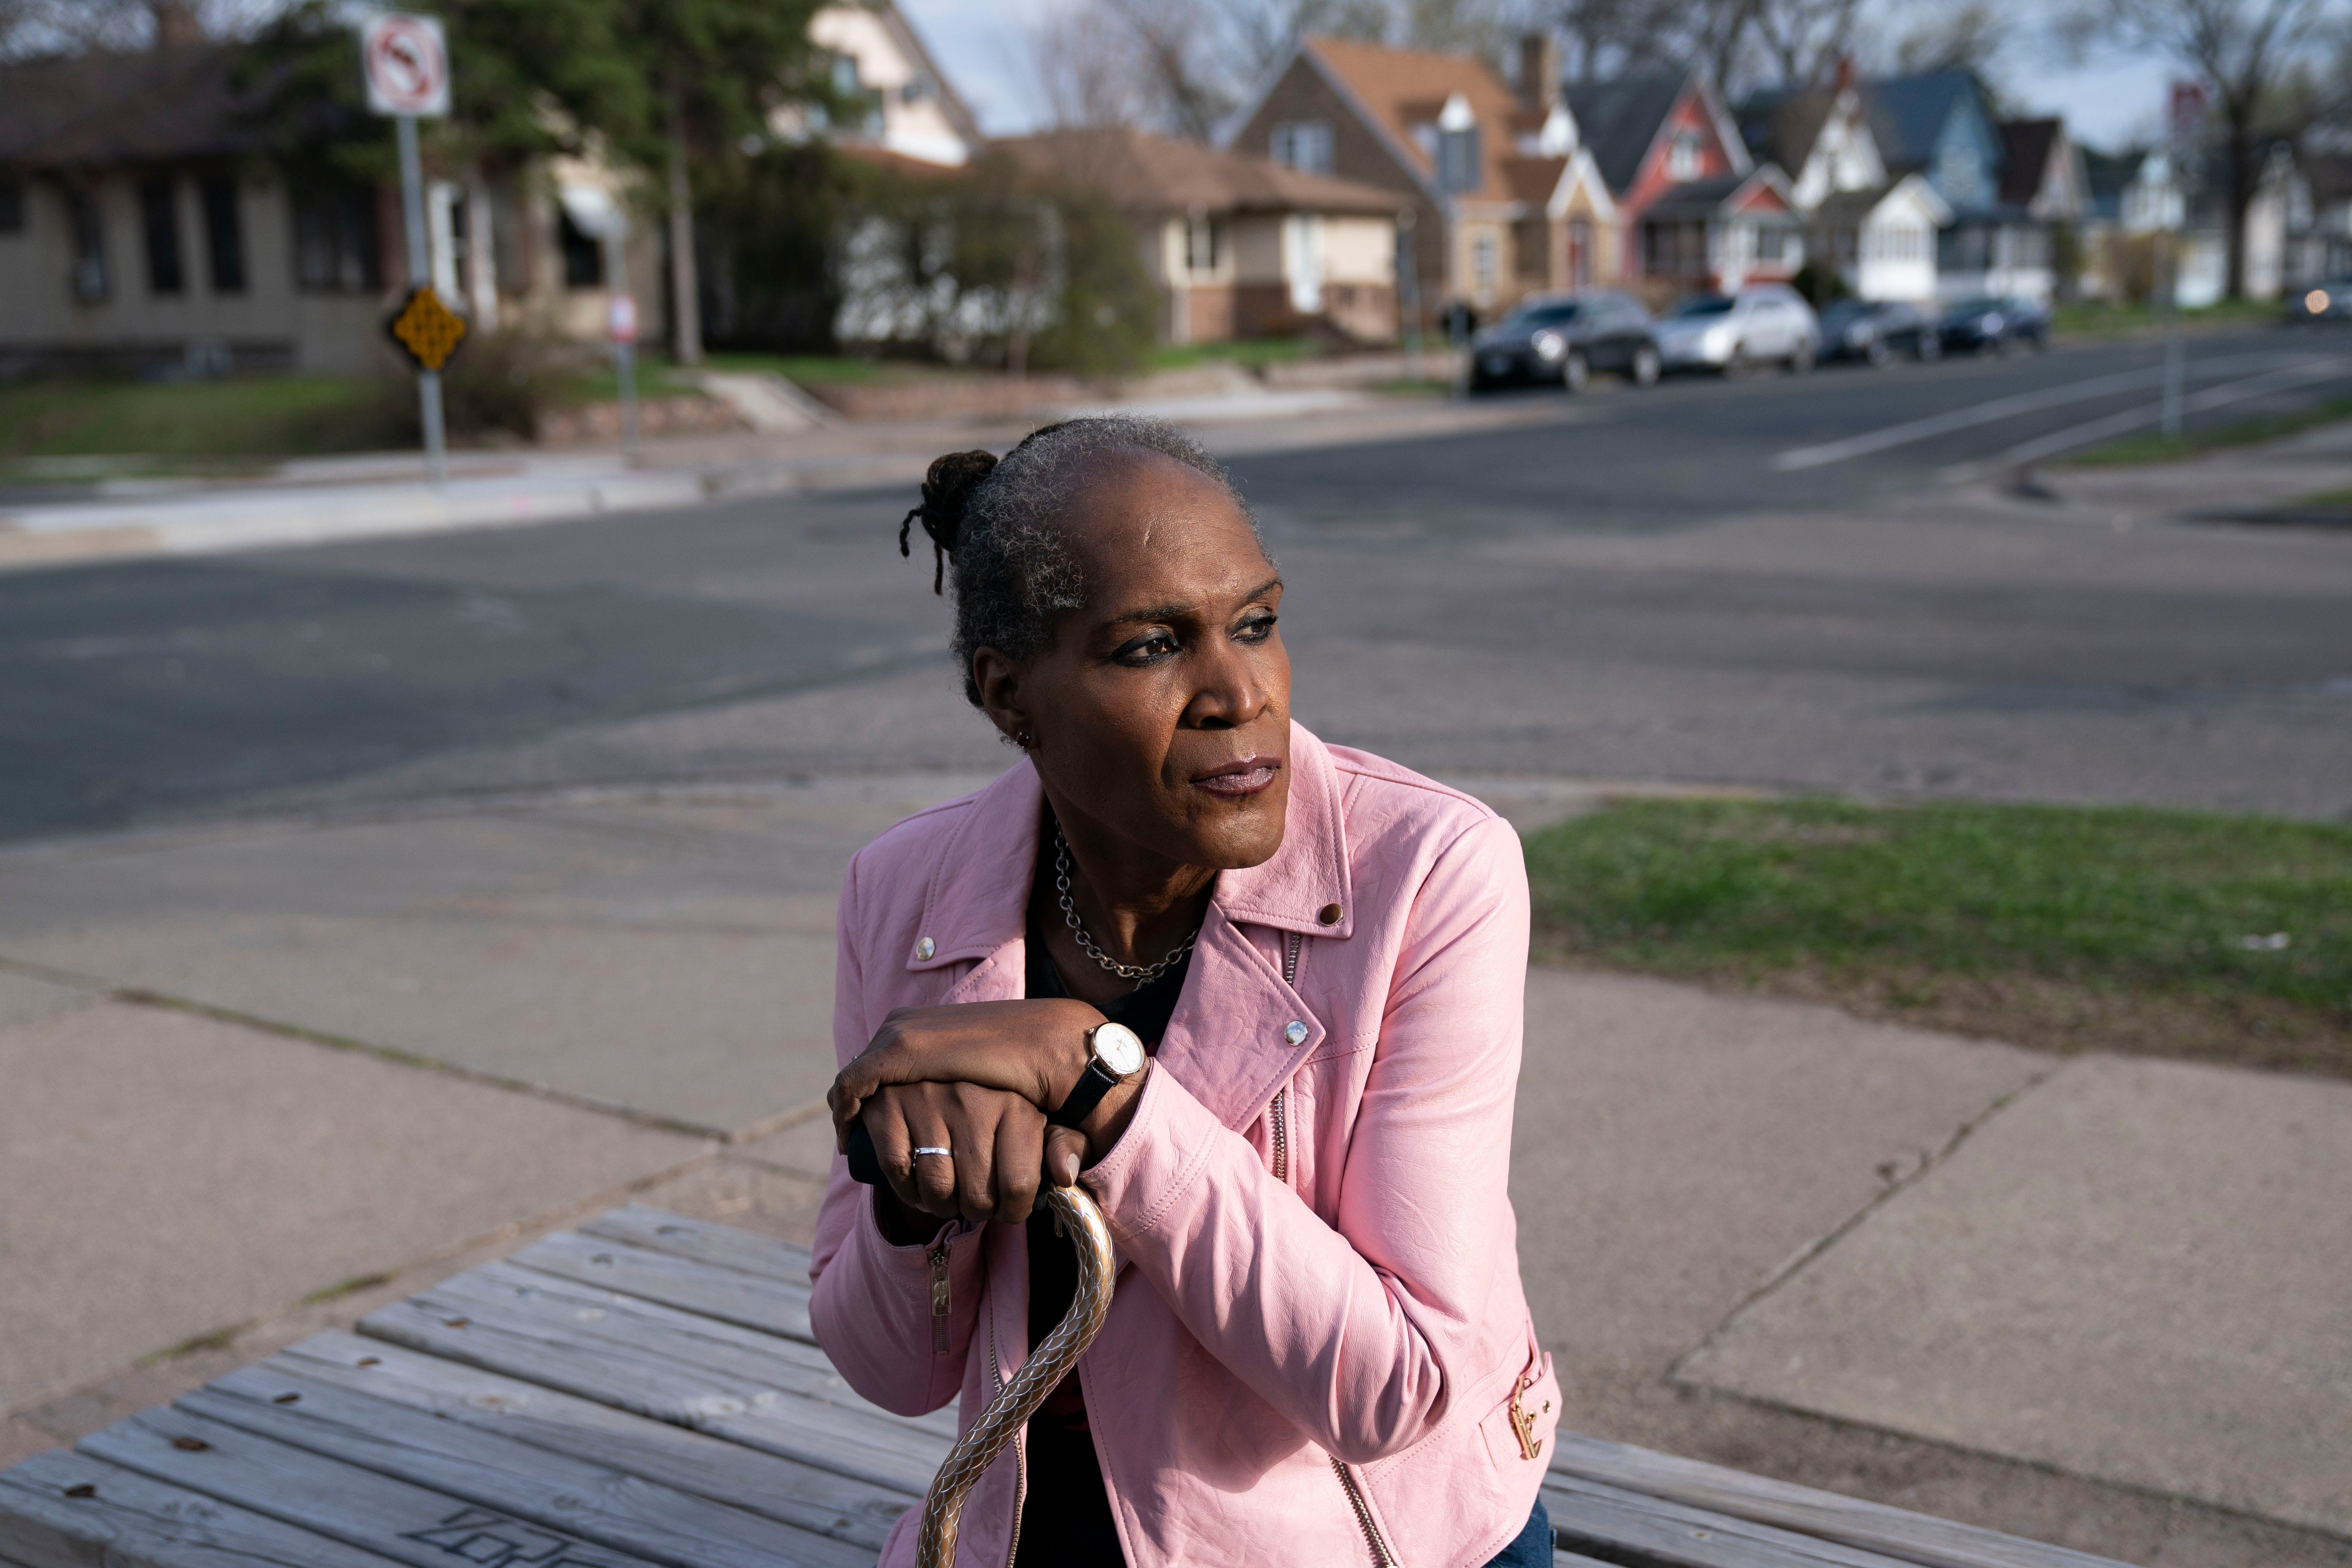 "You talk about the trauma. I really believed that George Floyd Square is contributing to that trauma," said Minneapolis Council Vice President Andrea Jenkins, whose ward includes the neighborhood where Floyd died. "I do recognize the need for grieving, for healing, for trauma, relief. And I believe we can do all of those things. We don't have to have the street closed to do those things."